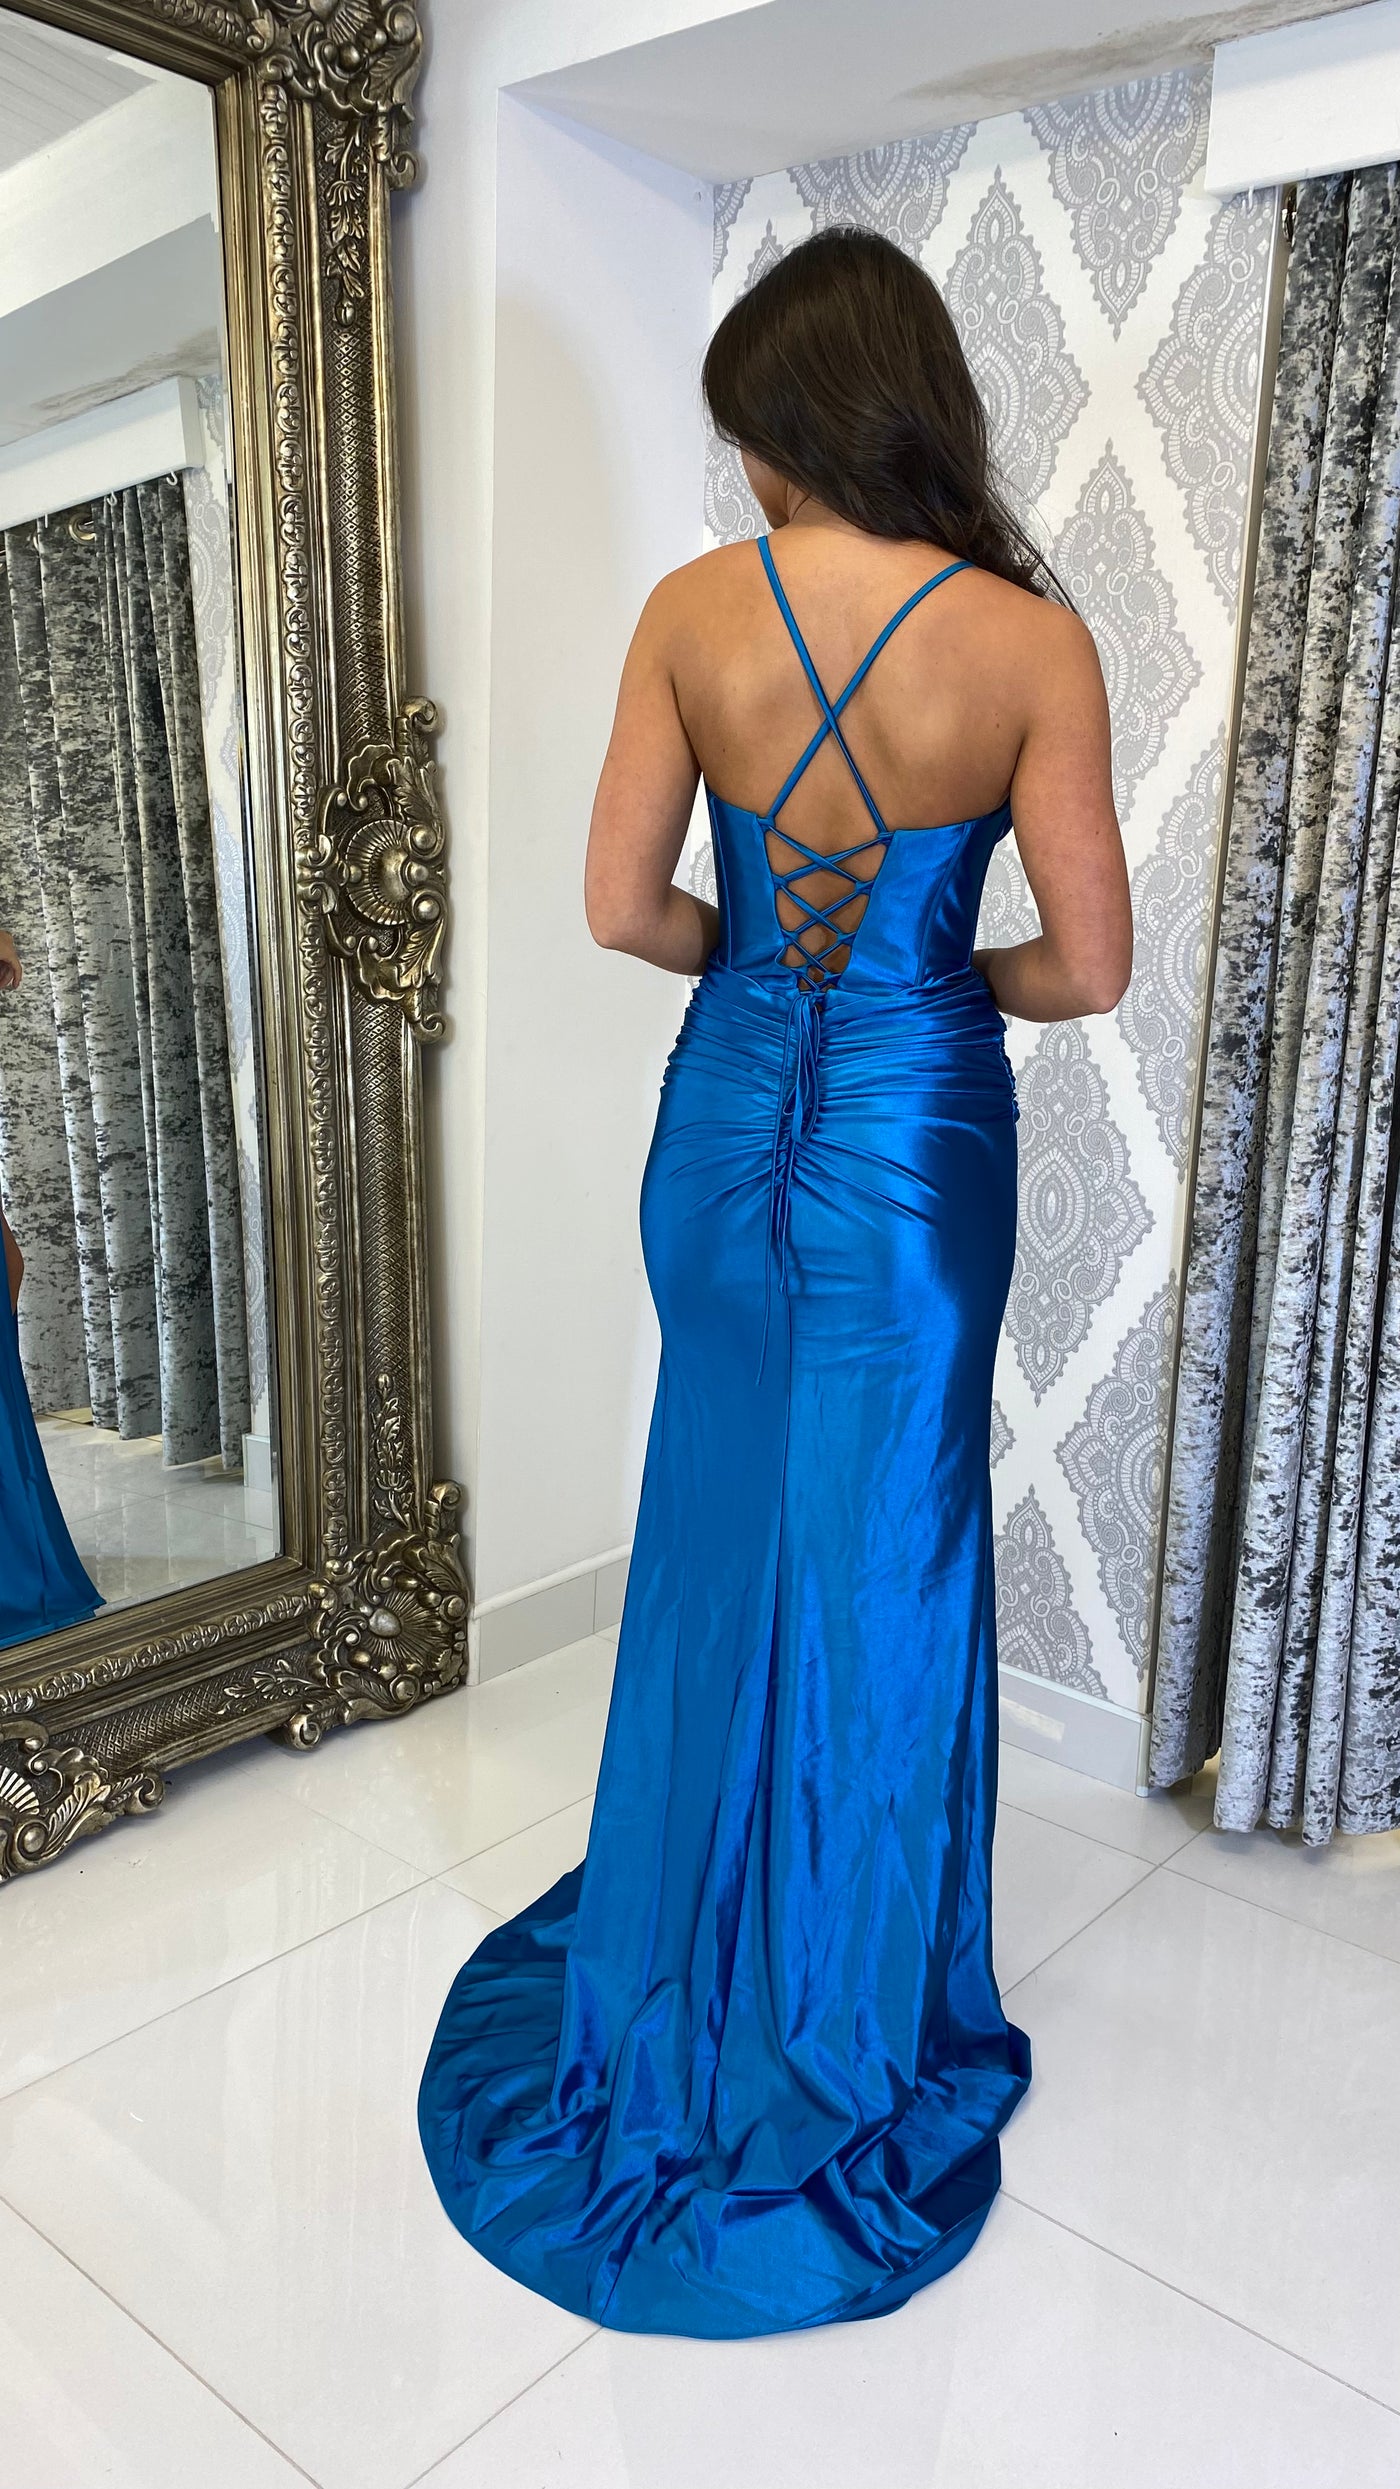 Satin Corset Style Full Length Gown In Teal